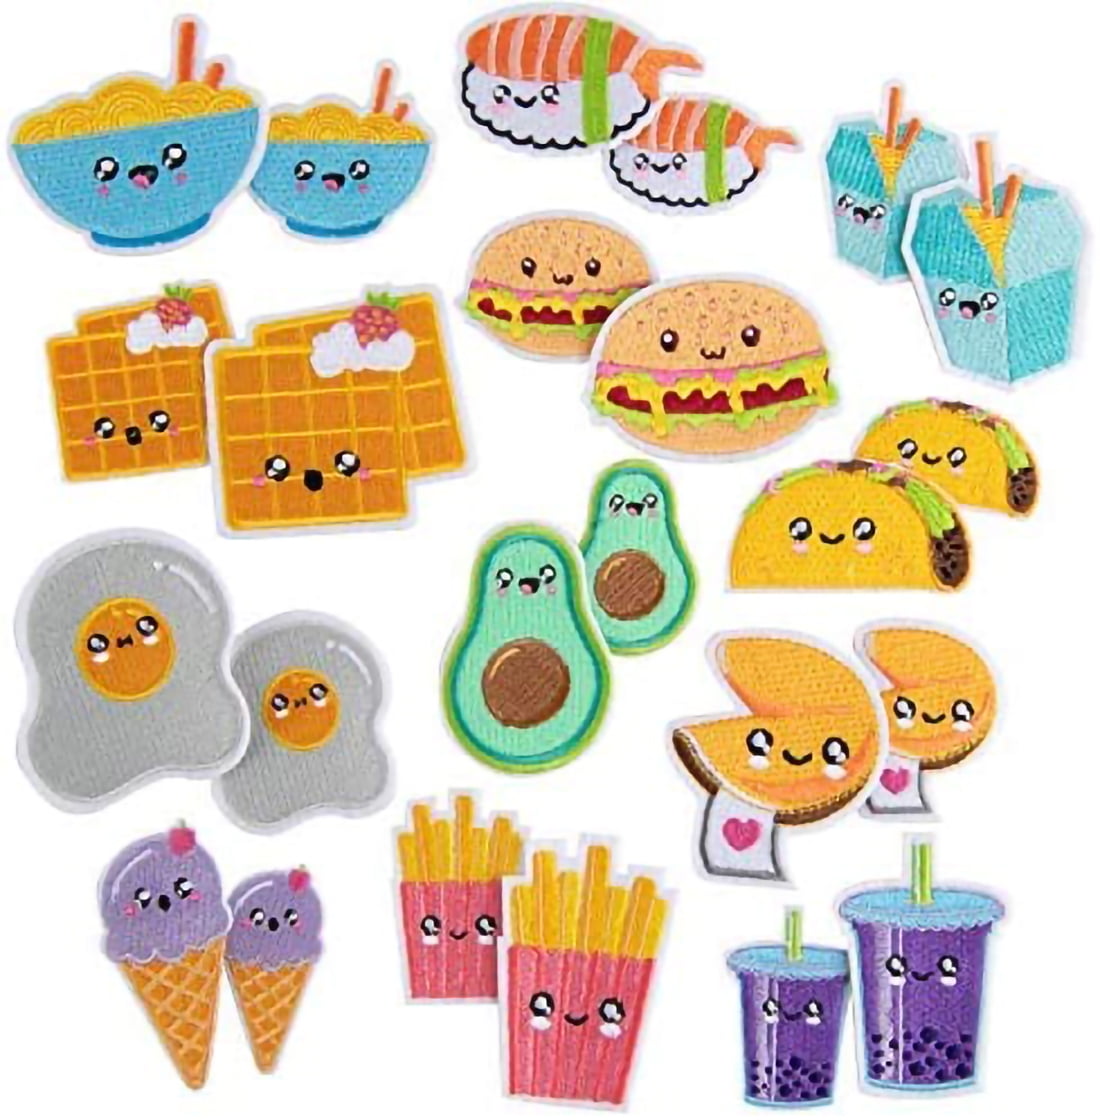 Idiy Kawaii Iron on Patches (24 Pack)- 12 Cute Sew on Patch Food Designs in 2 Sizes (2 inch & 2.5 inch) Craft Kit for Clothing, Accessories & School